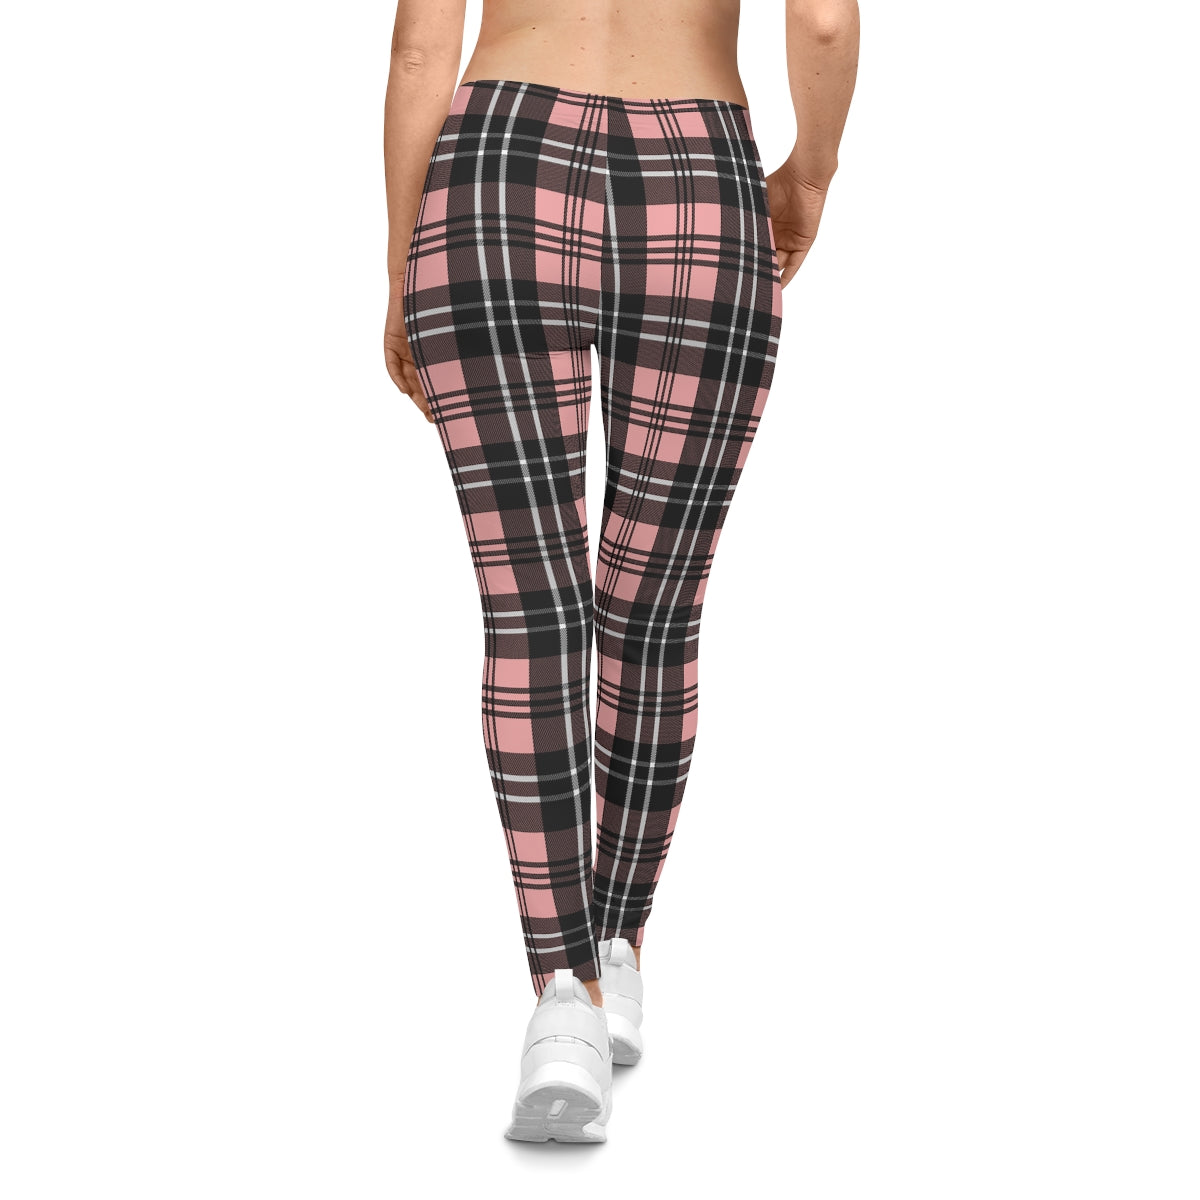 Pink Plaid Leggings, Women's All Over Print Cute Trendy Workout Yoga Pants,